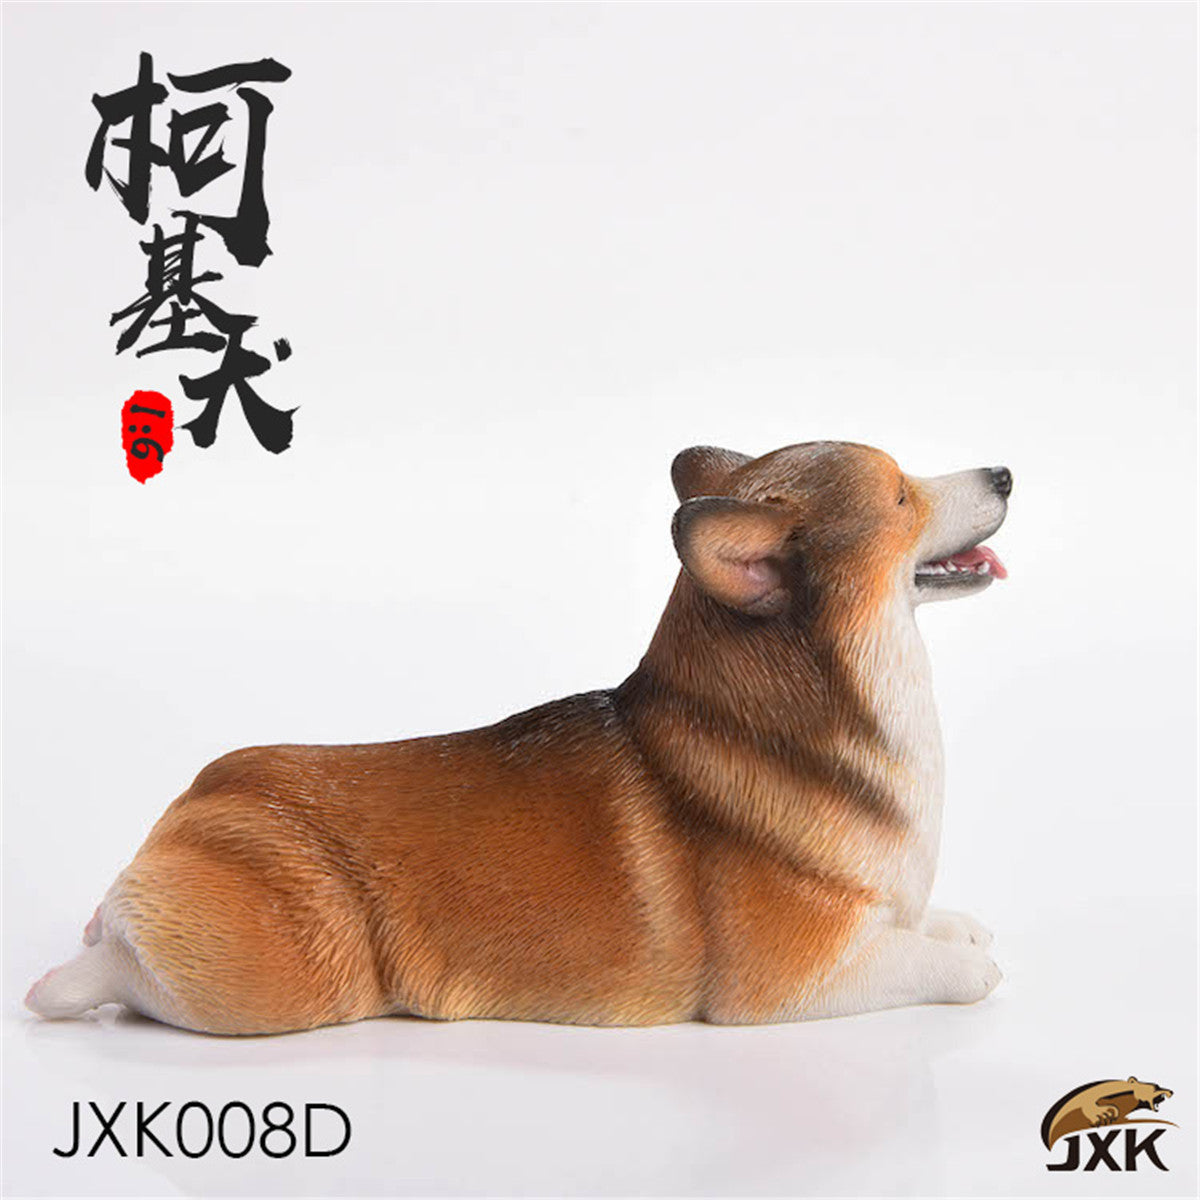 1/6 Scale Corgi Dog Model Figurine Toy for 12in Action Figure Doll 